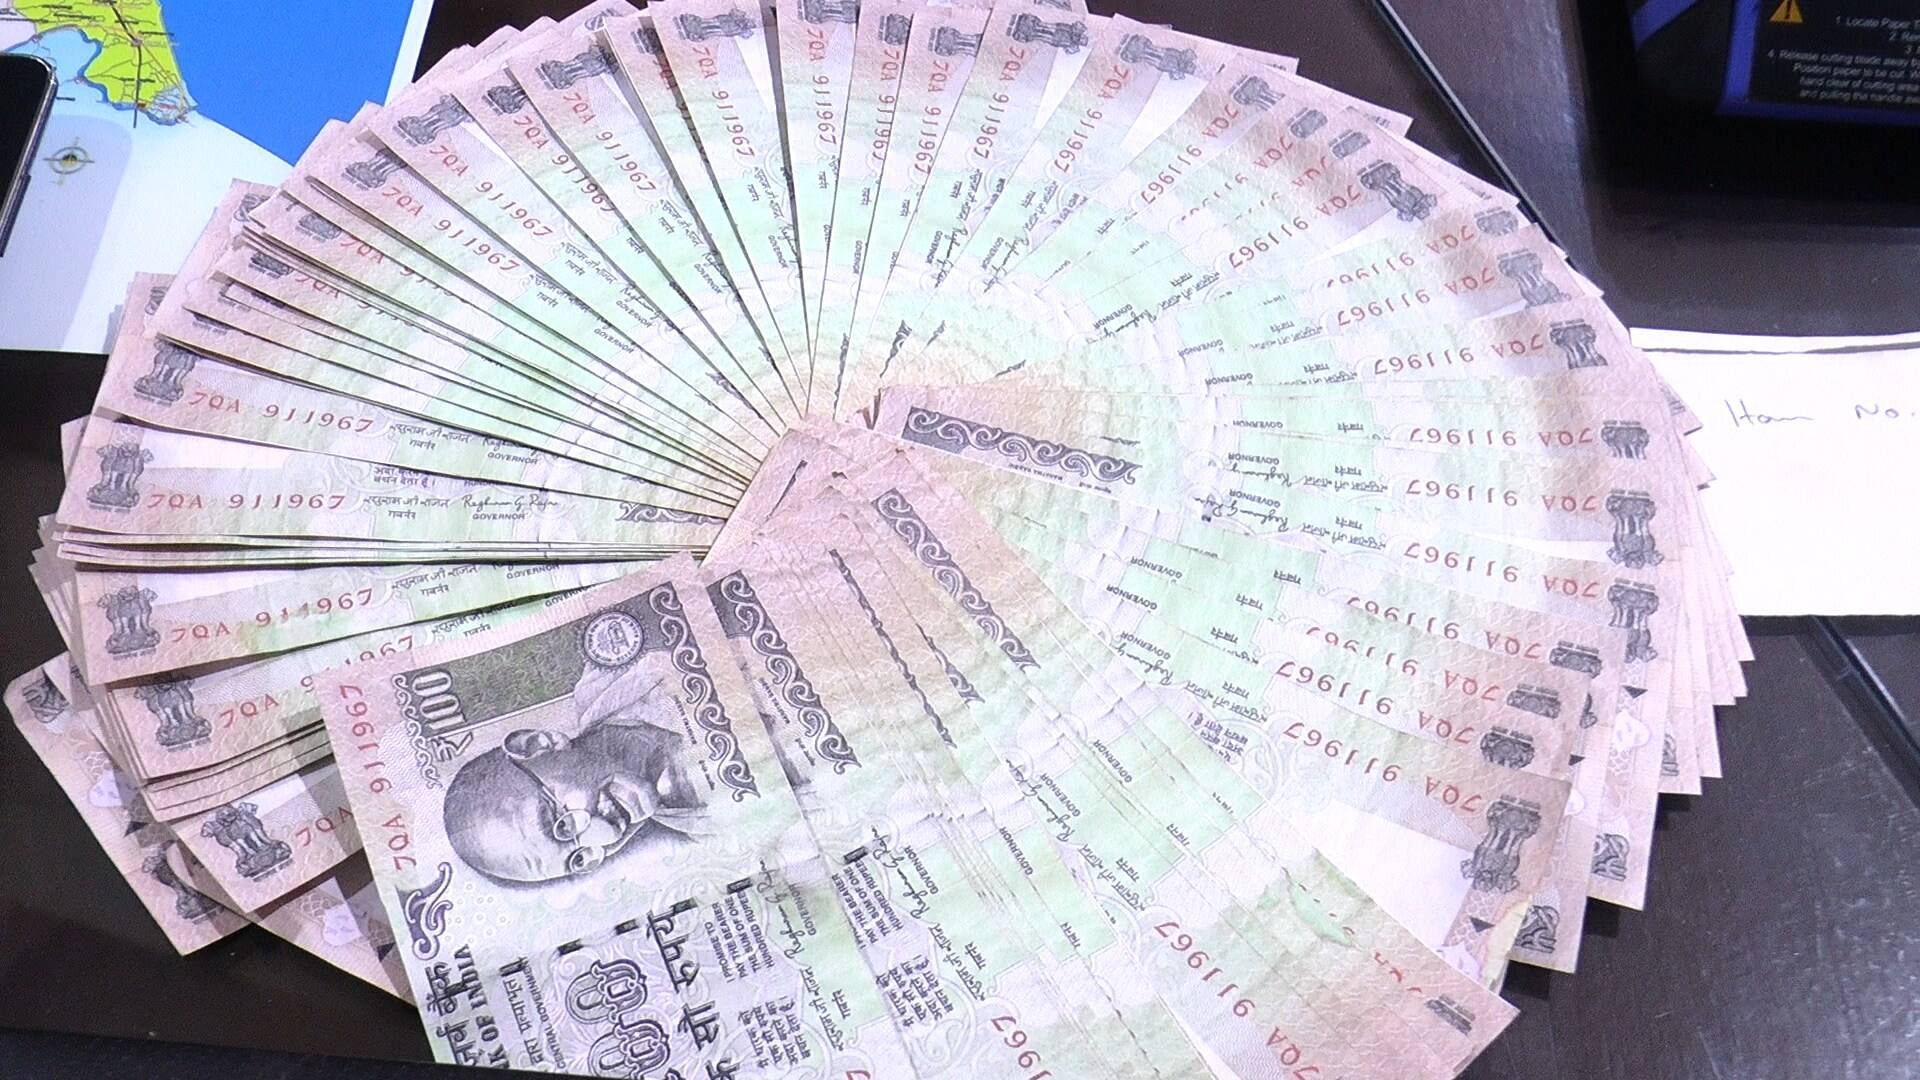 fake note printing mobile shop owner and girl arrested in kozhikode